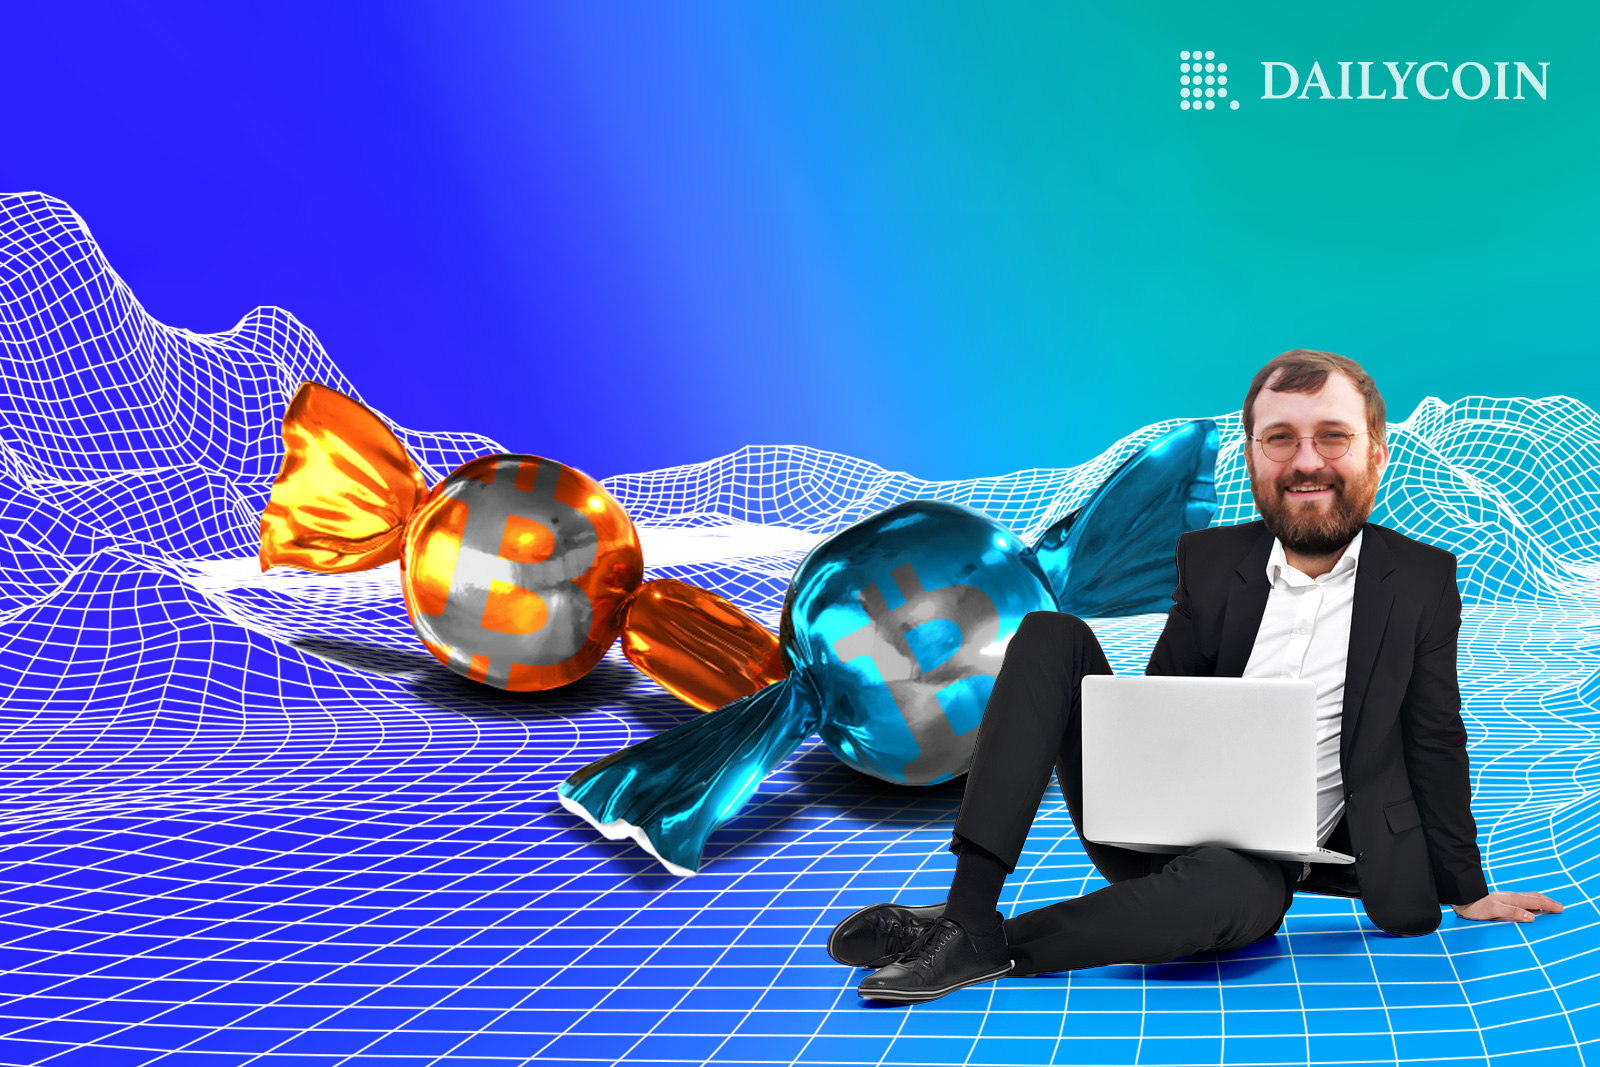 Charles Hoskinson with a laptop in front of wrapped Bitcoin (BTC) candies vaporwave